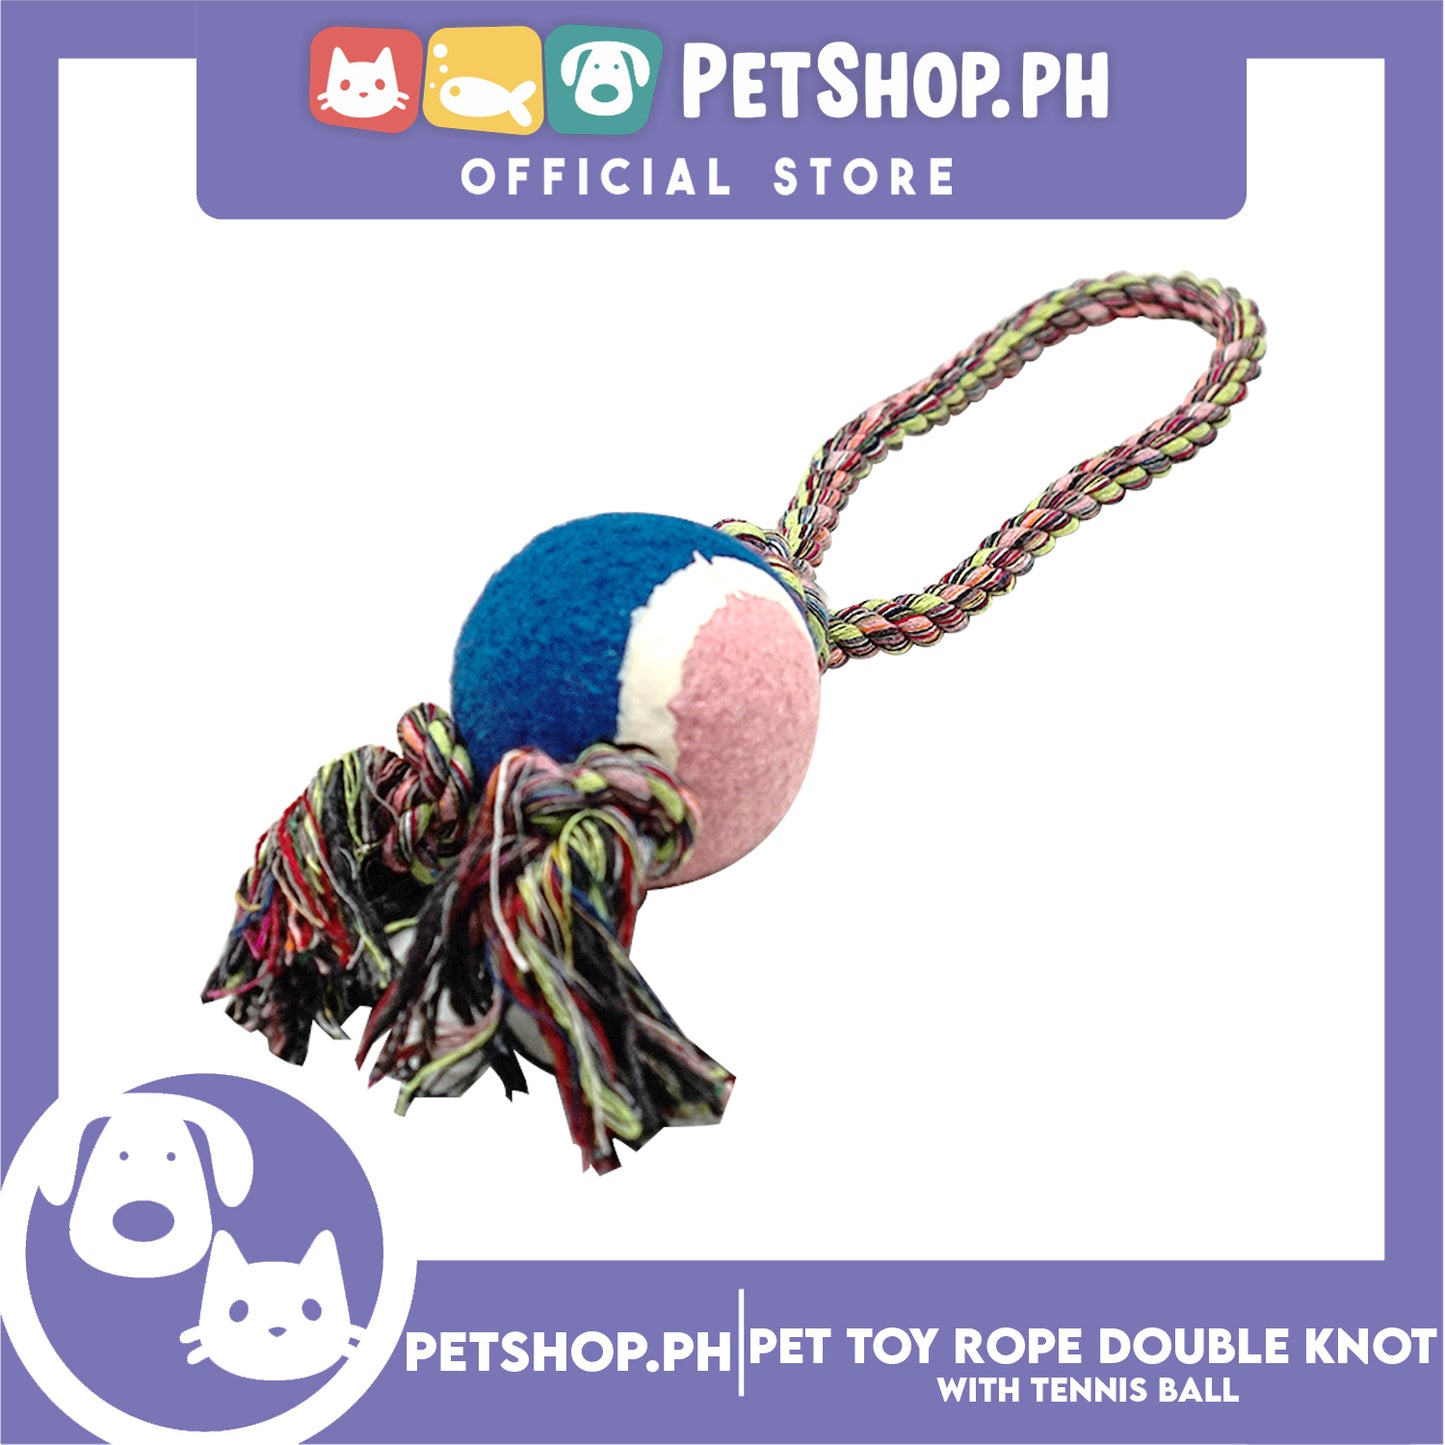 Pet Toy Rope Double Knot with Tennis Ball Toy for Dog- Interactive Toy, Pet Ball, Tennis Rope